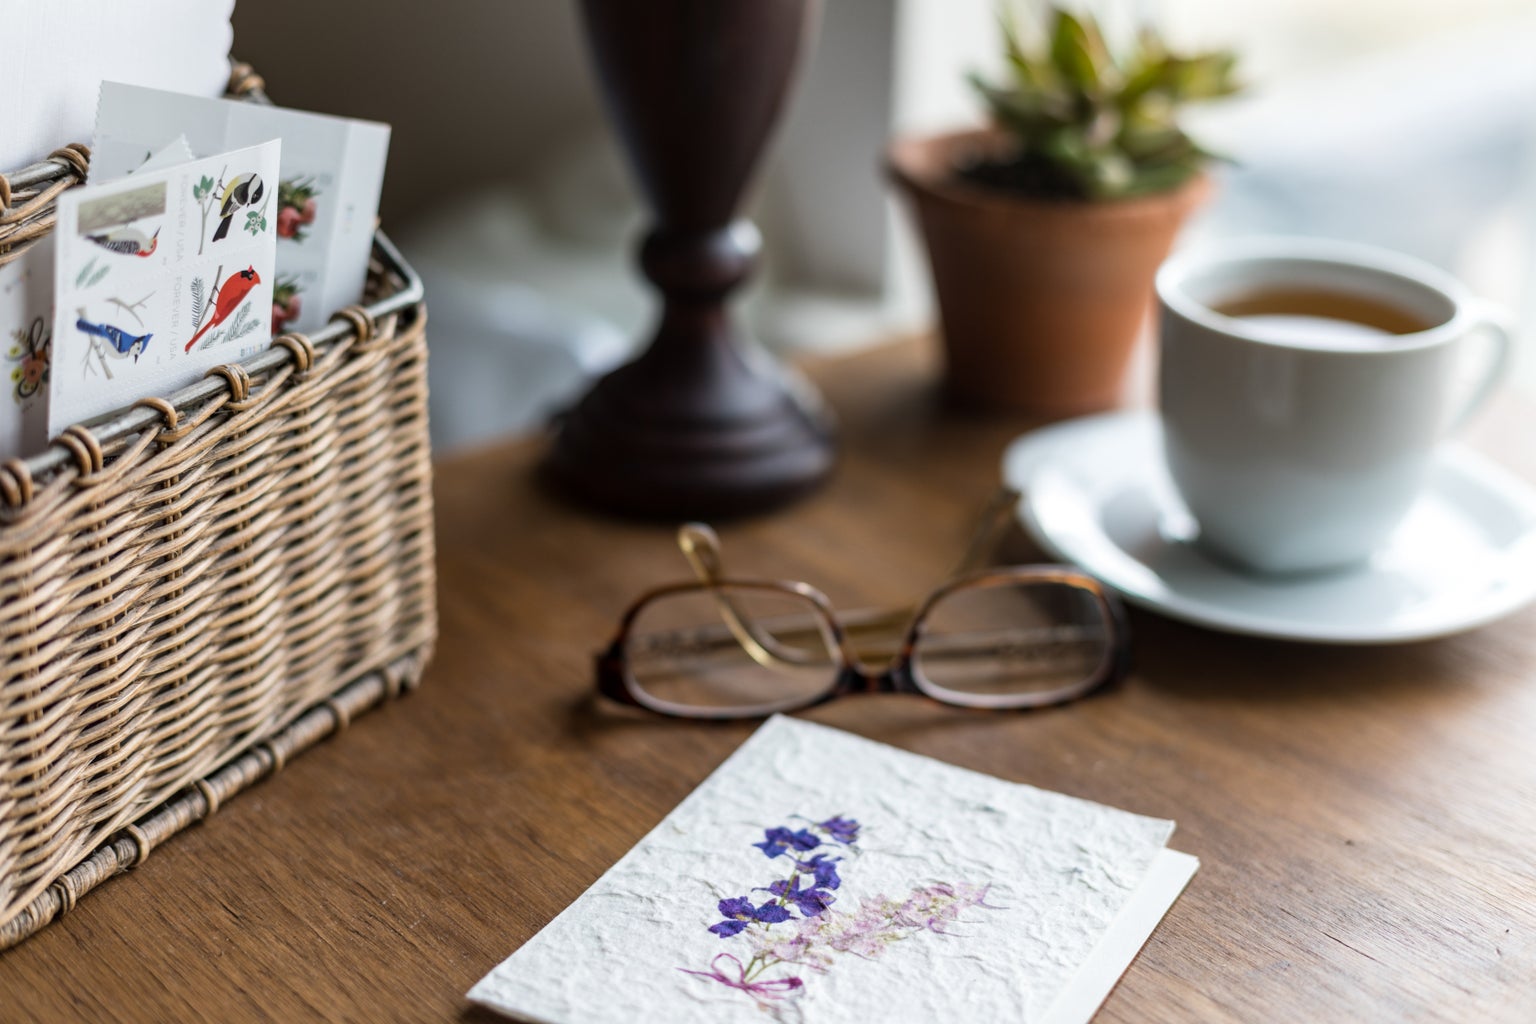 white ceramic mug beside eyeglasses, card with print of purple flowers, and basket of postage stamps